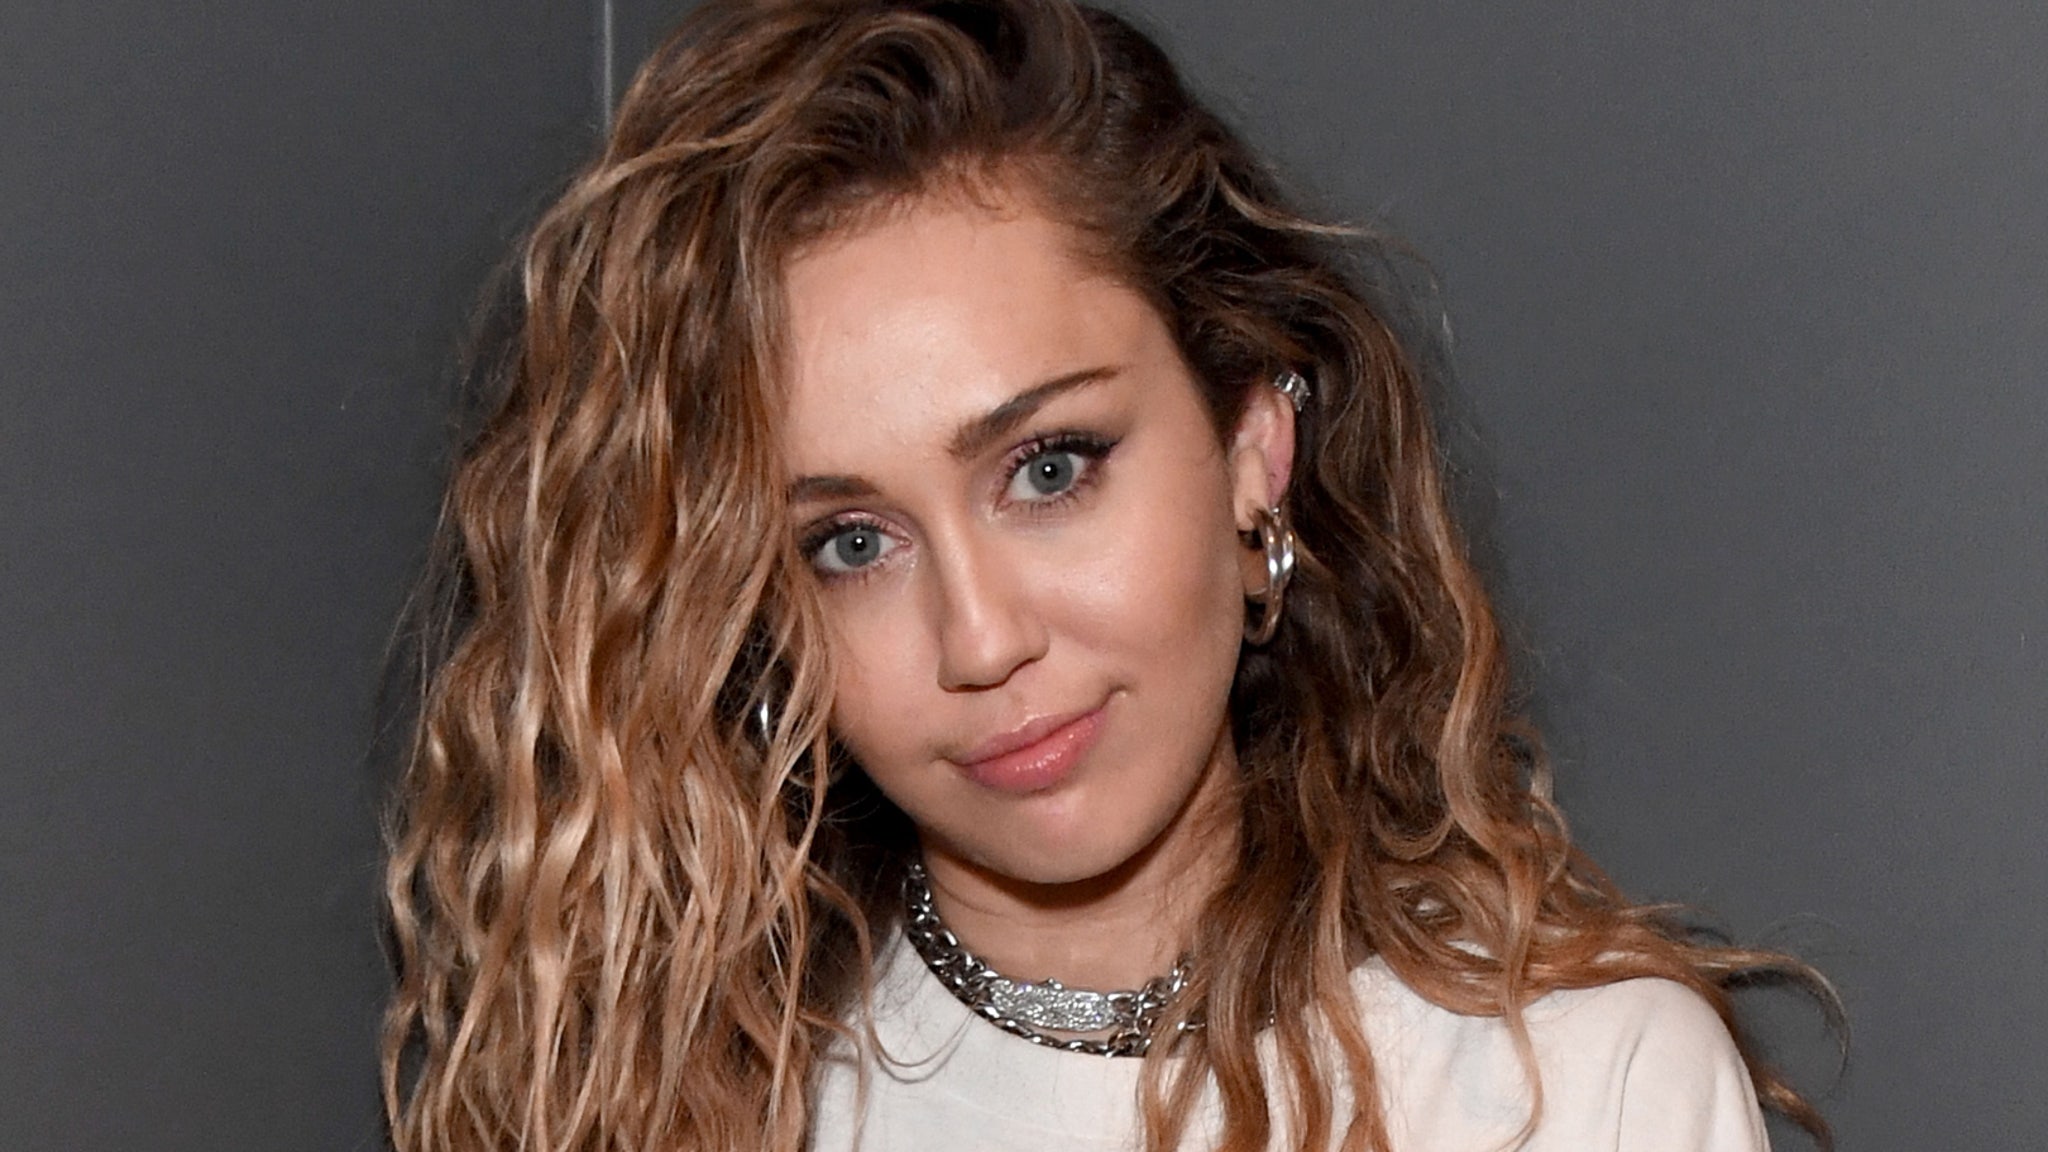 20 Years Old Miley Cyrus Porn - Miley Cyrus, 23 Other Celebrities Reveal When They Lost Their Virginity